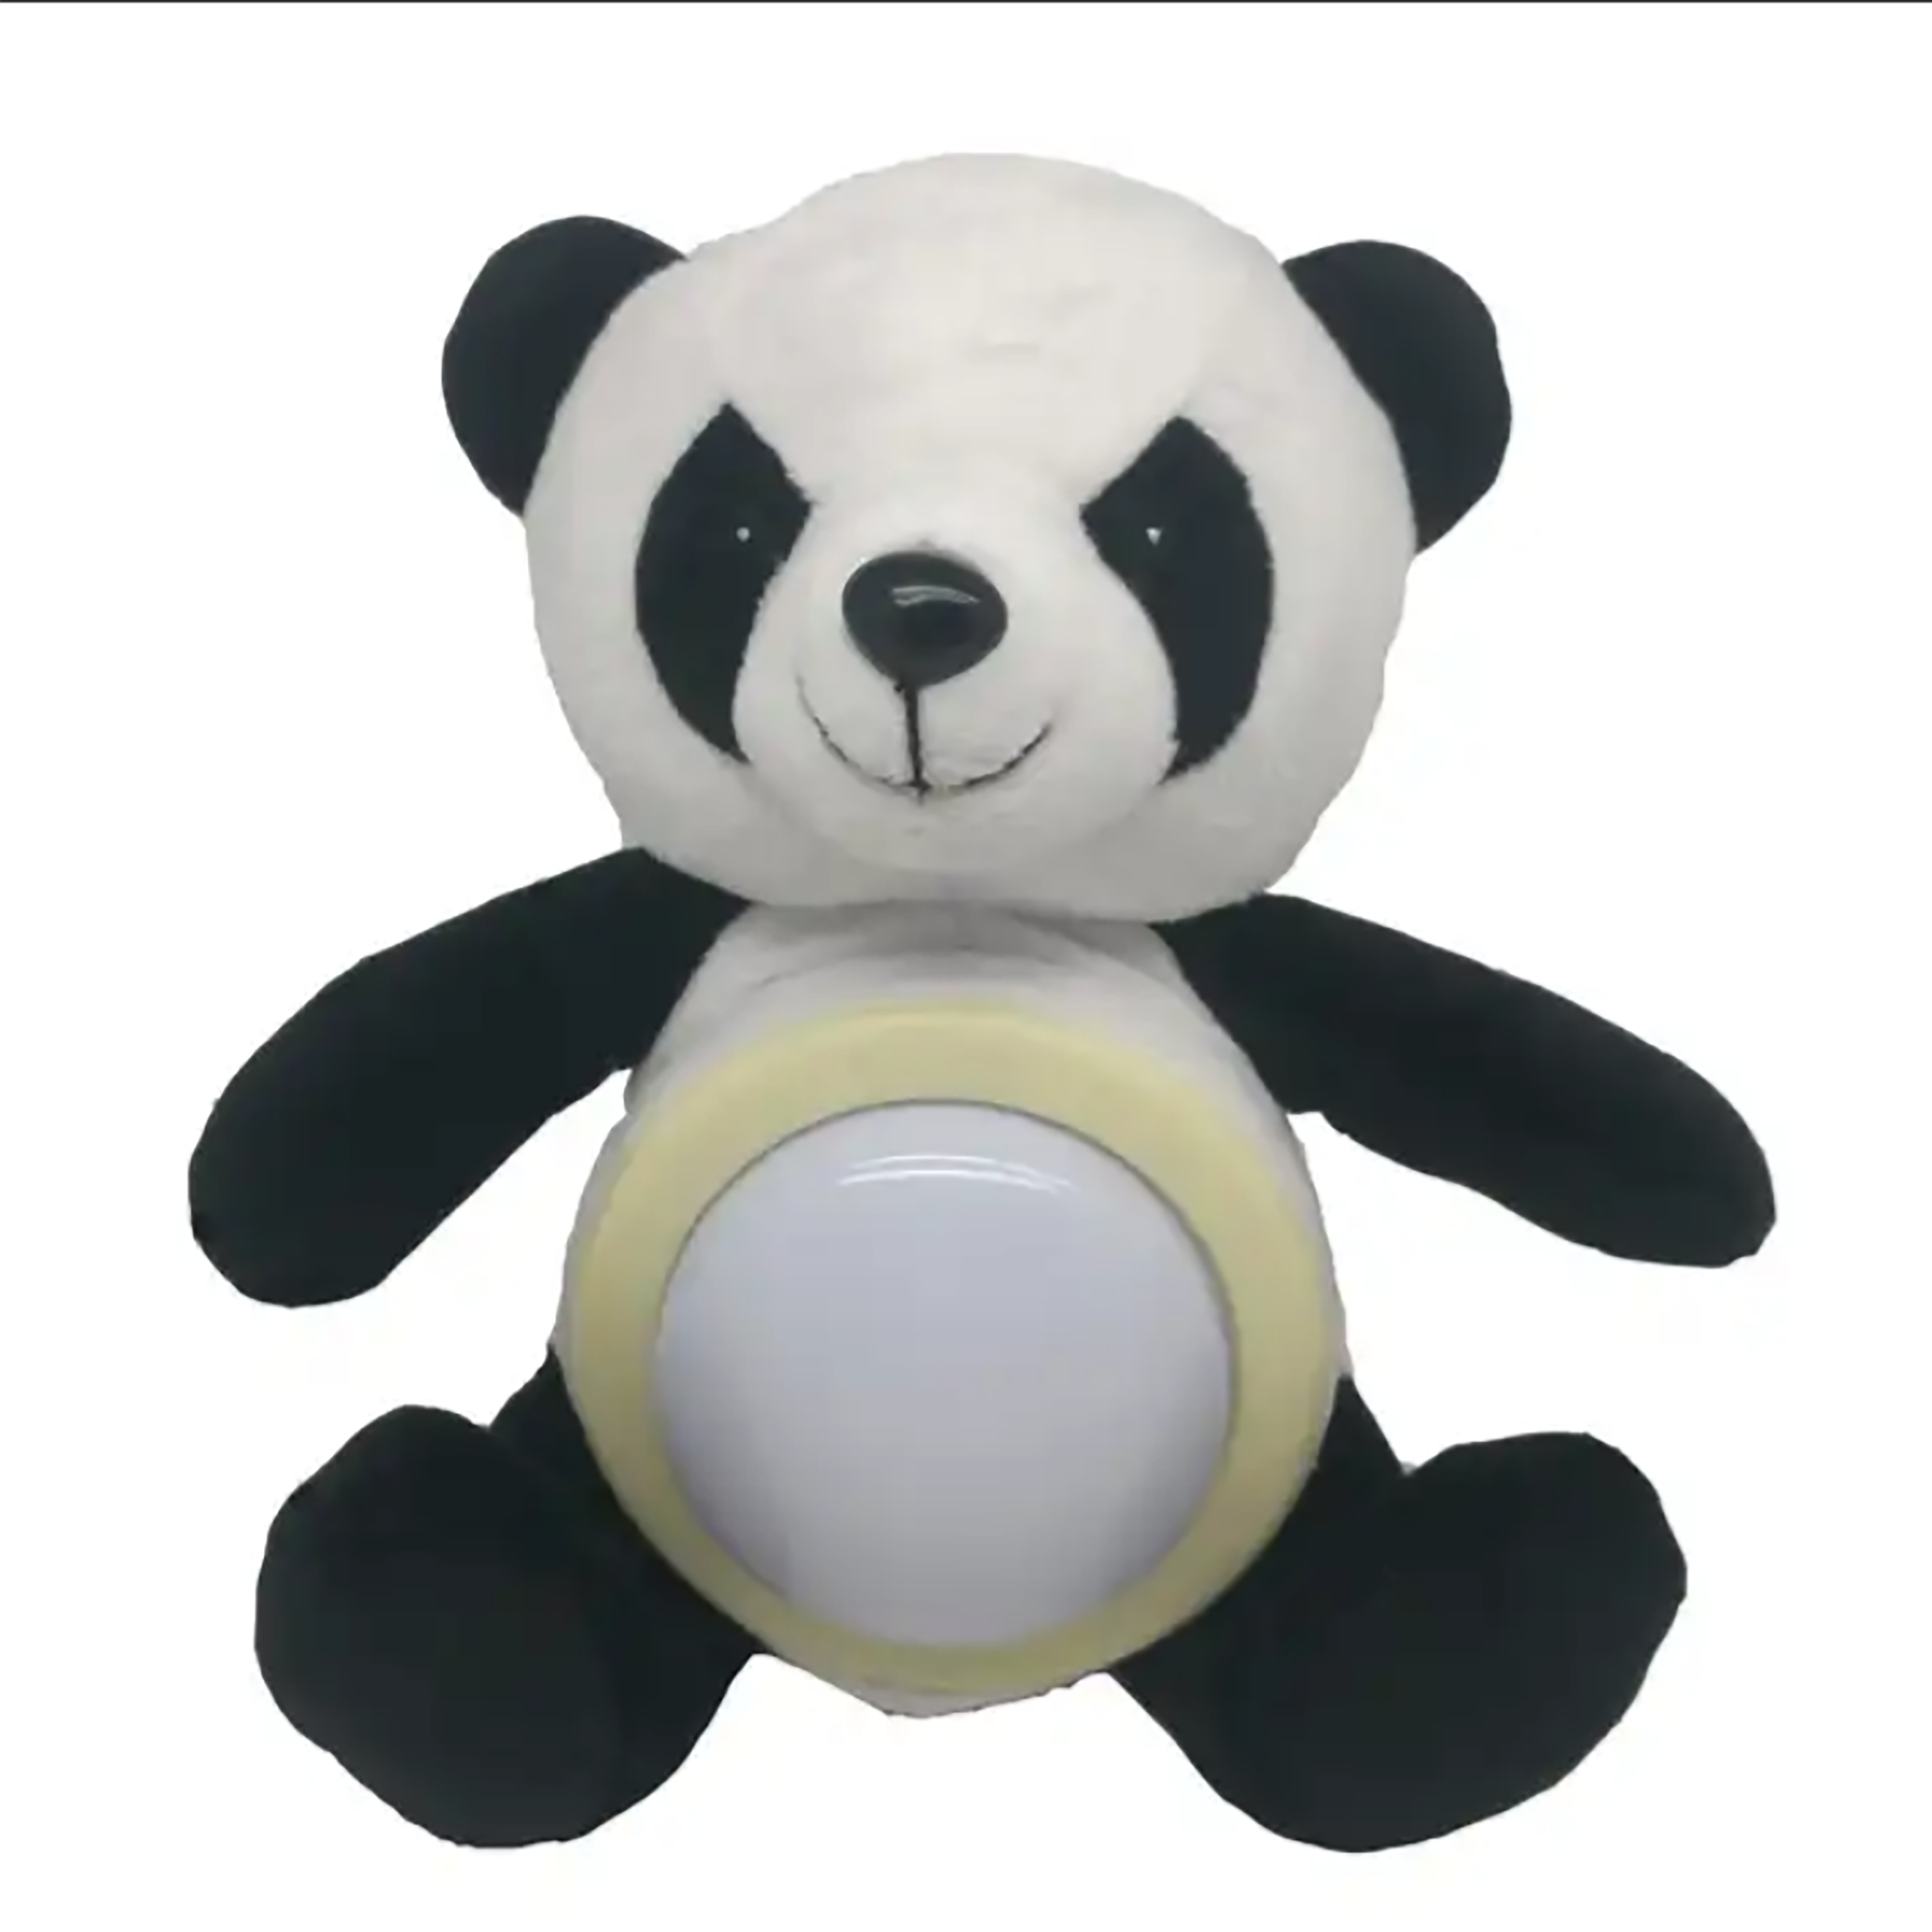 Illuminated Plush Musical Toy, Soothing Light-Up Stuffed Panda Night Light for Babies & Toddlers with Gentle Melodies and Cozy Hug Companion, Interactive Sleep Aid & Playtime Companion